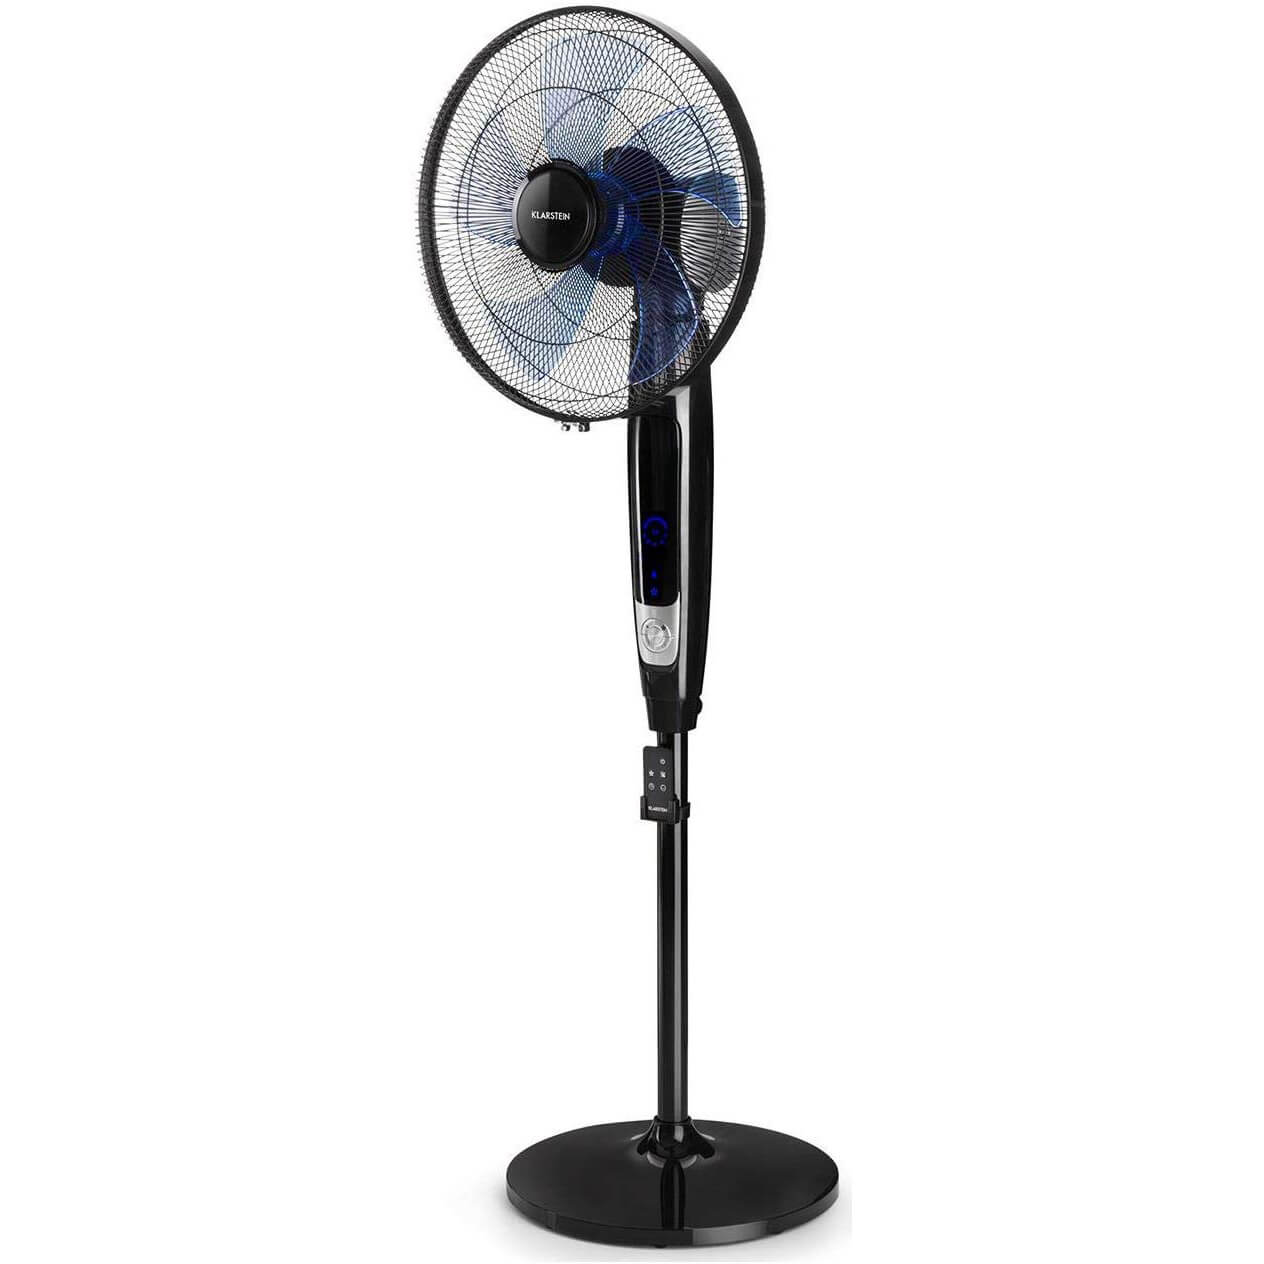 Offices and Bedrooms Adjustable Height /& Pivoting Fan Head Perfect for Homes Pro Breeze/® 16-Inch Pedestal Fan with Remote Control and LED Display 4 Operational Modes 80/° Oscillation